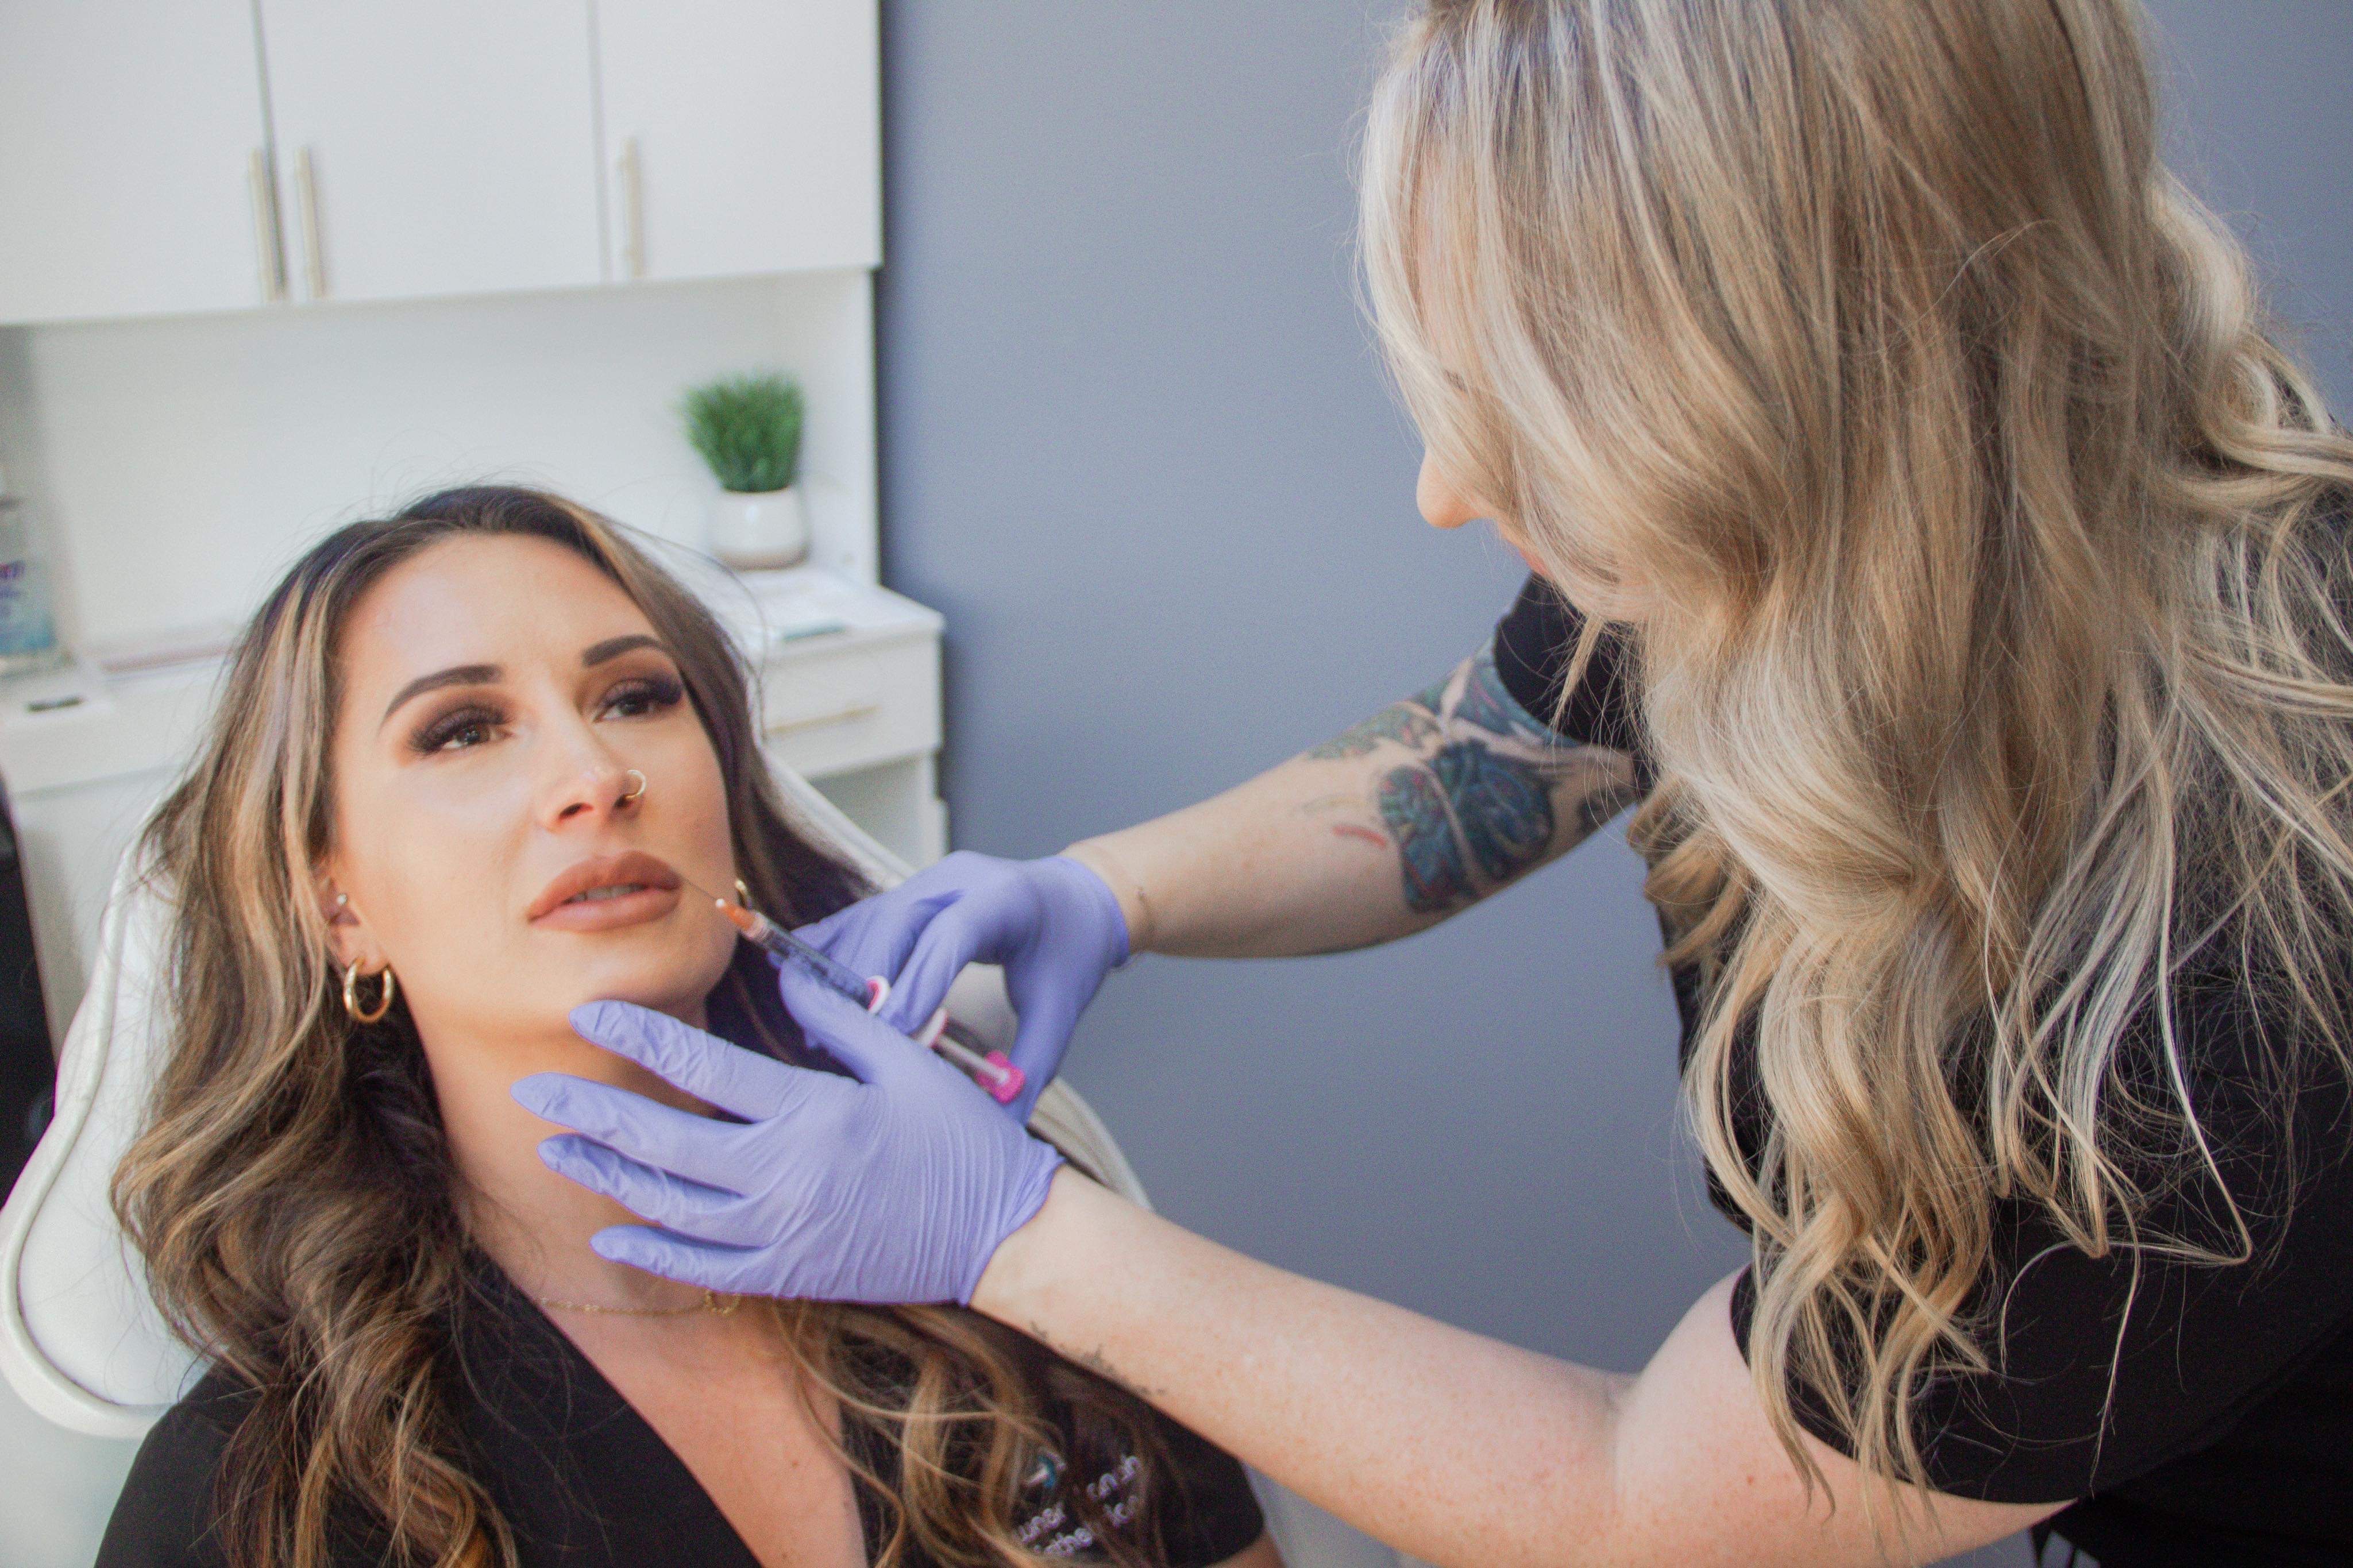 😍 Capital Cryo and Wellness provides facial and lip filler near me to local residents of Salem Oregon 97301. Our clinic offers a comfortable and relaxing atmosphere where you can get the latest Lip fillers, as well as affordable and effective treatments. Visit us today to learn more about our services and how we can help you feel your best. 971-301-2796